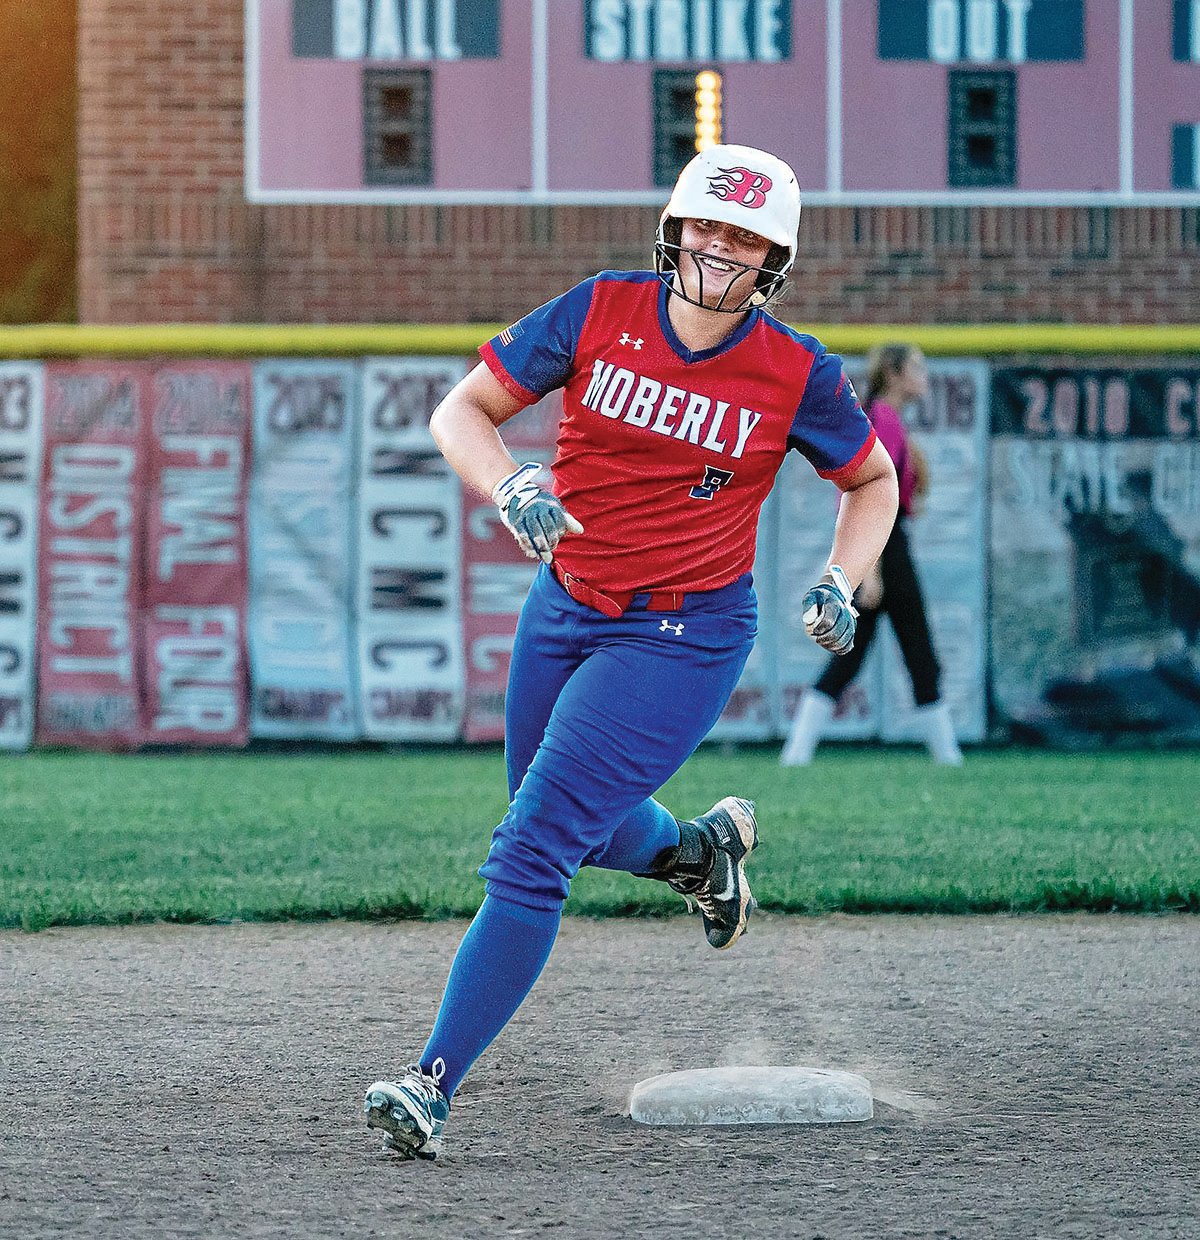 Jordan Pasbrig rounds the bases during the fourth inning after smacking her second home run of the game versus Mexico at Gallop Field.